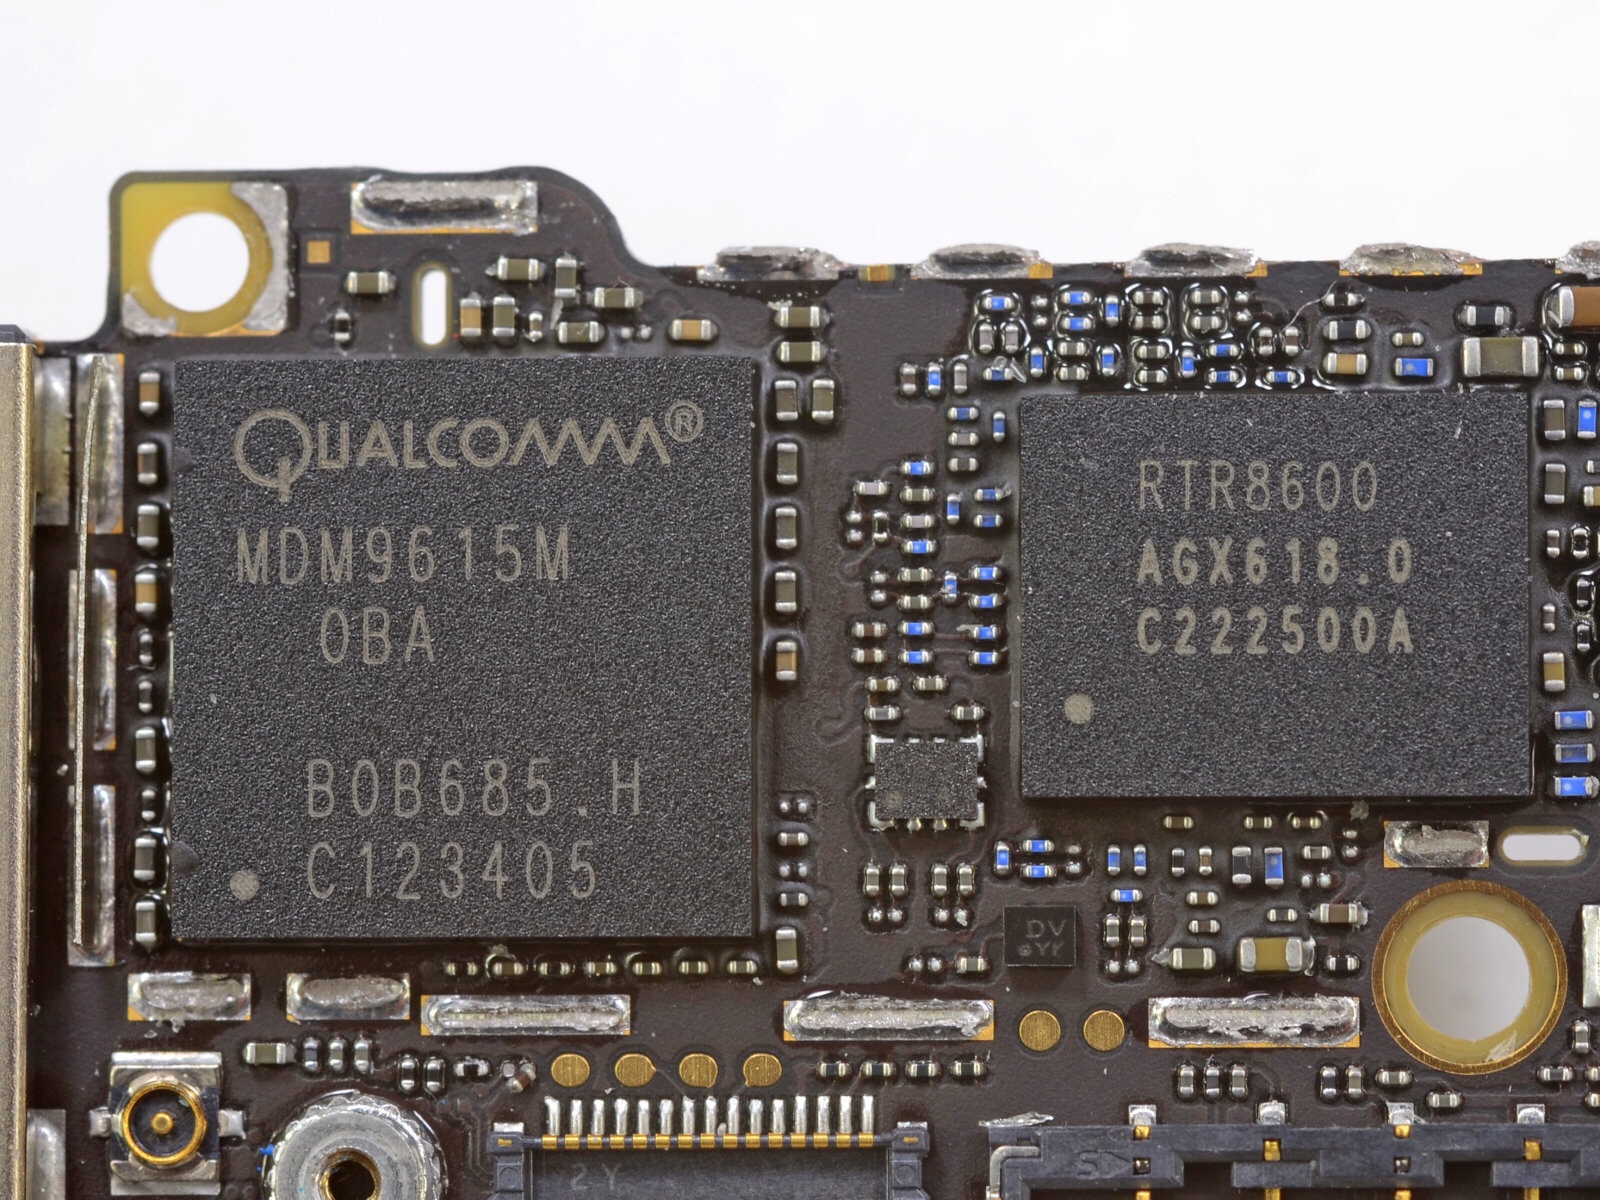 Both Qualcomm and Broadcom are making moves to help push the possible merger